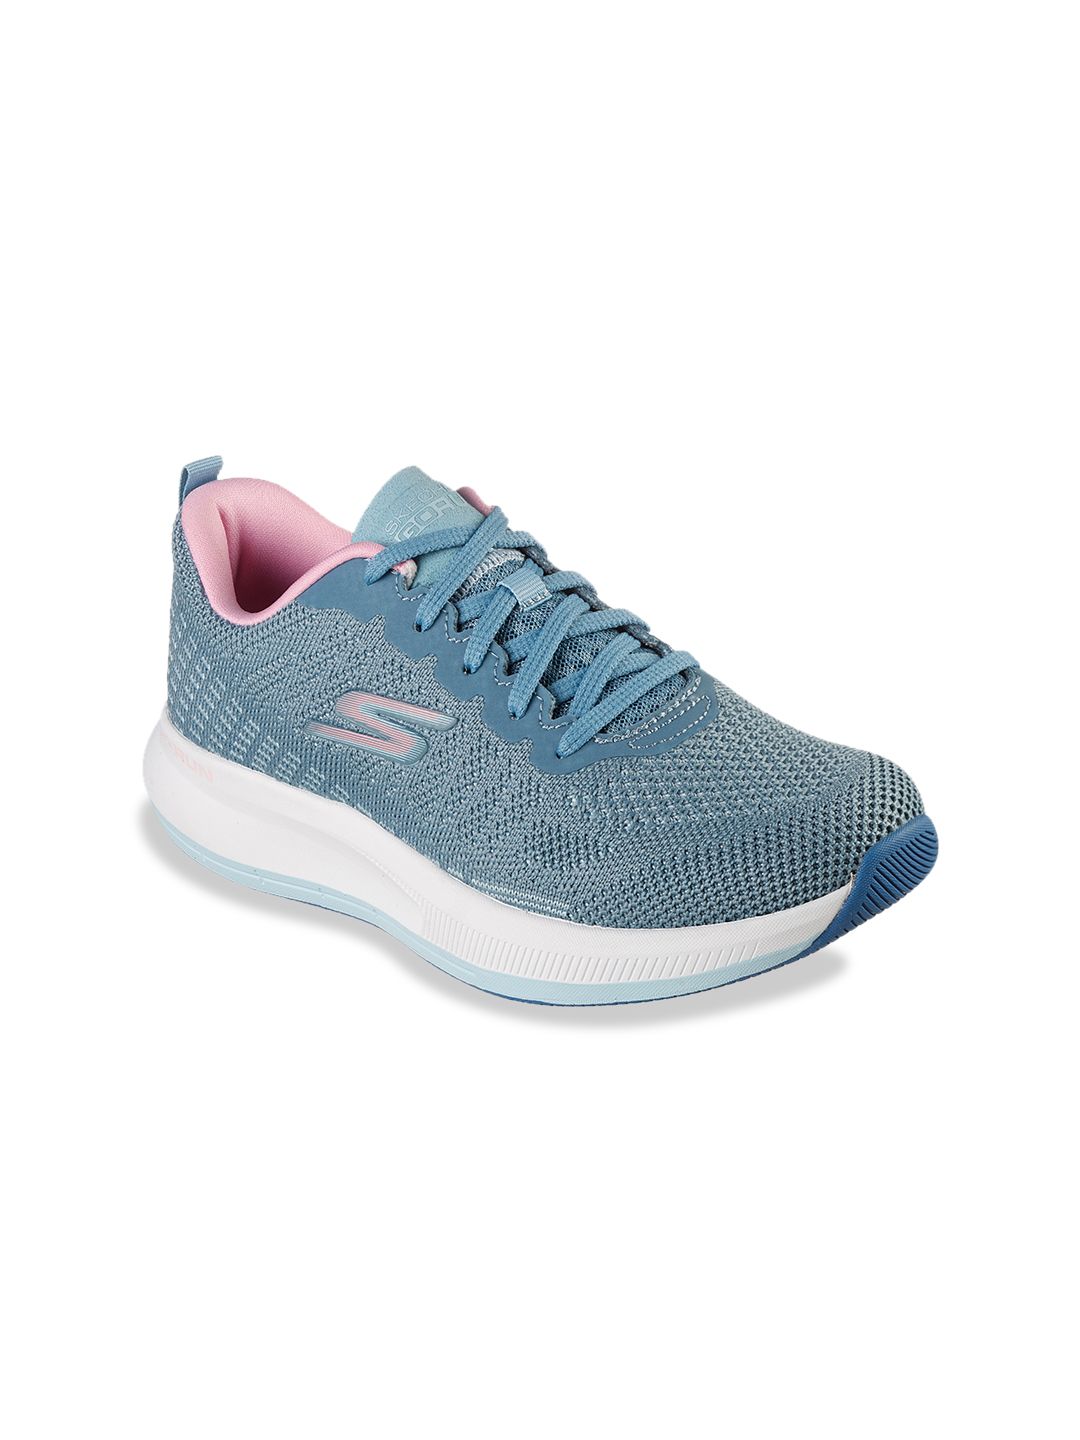 Skechers Women Multi Sports Shoes Price in India